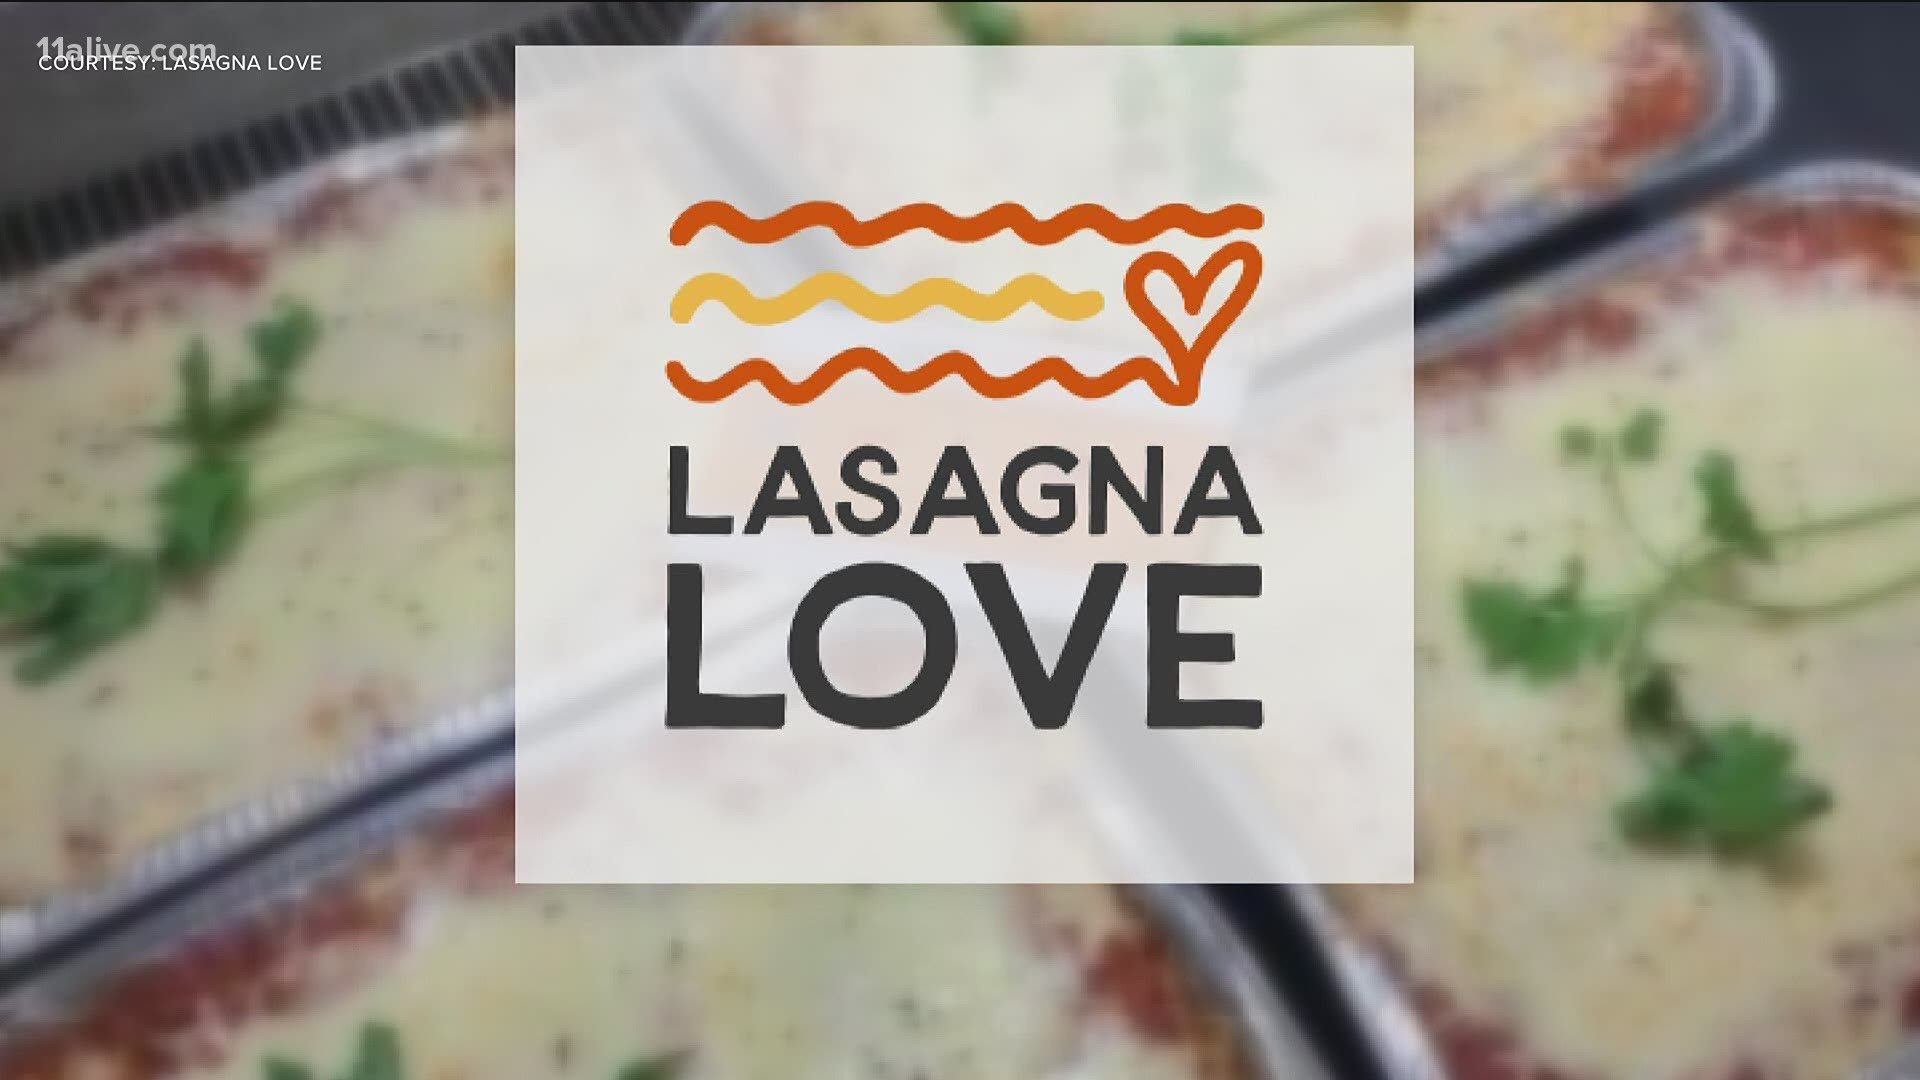 Lasagna Love started during the pandemic and has evolved into a nationwide network of 20,000 volunteers.